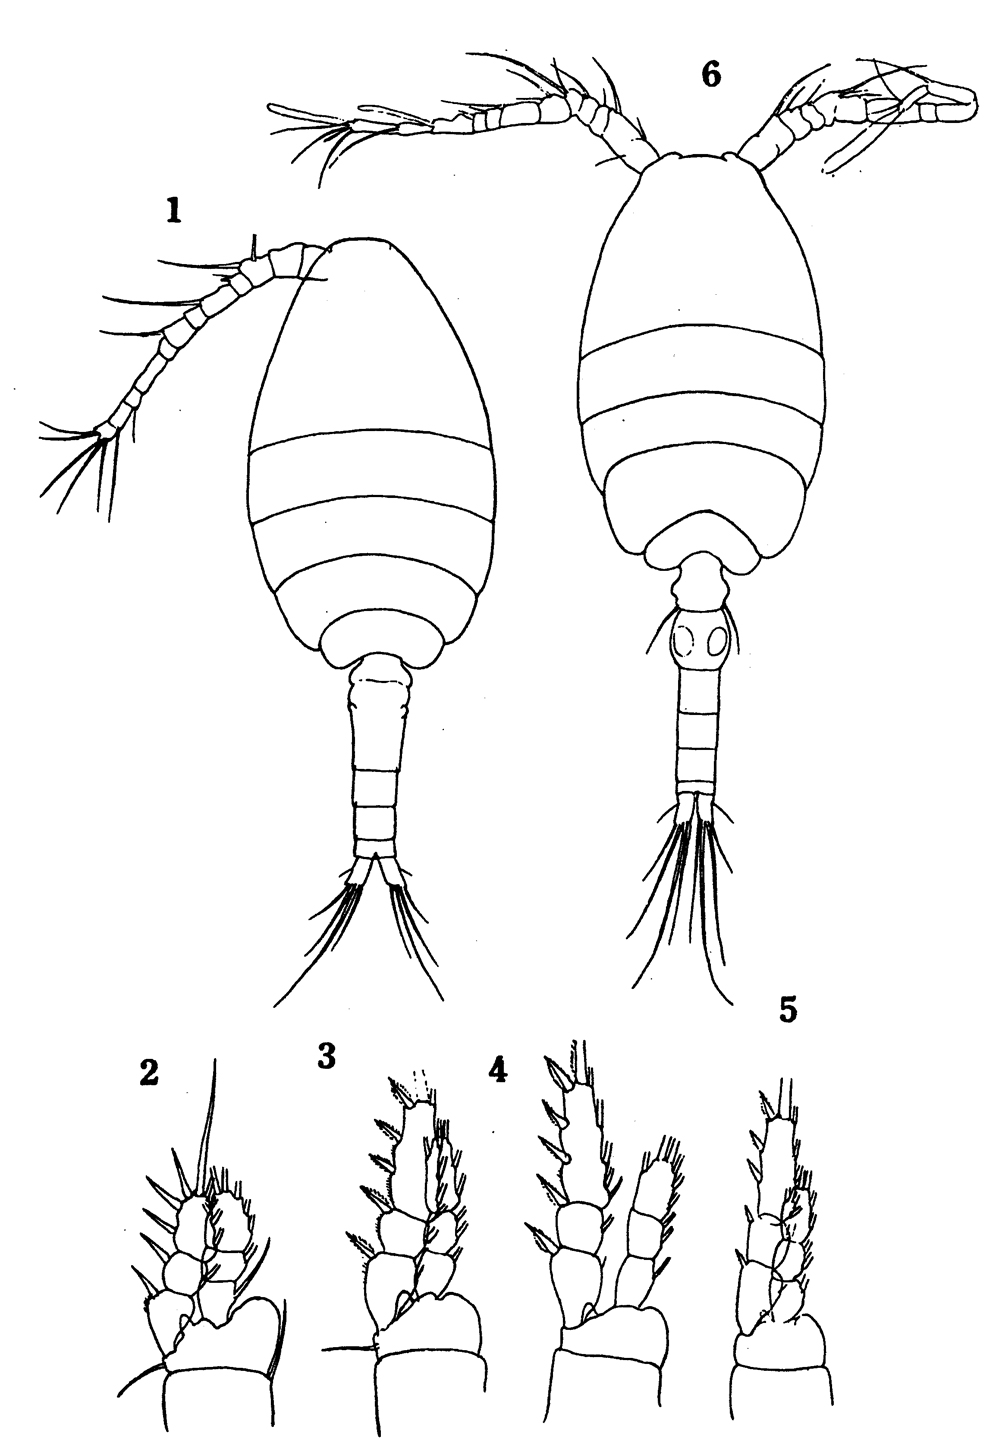 Species Oithona simplex - Plate 19 of morphological figures